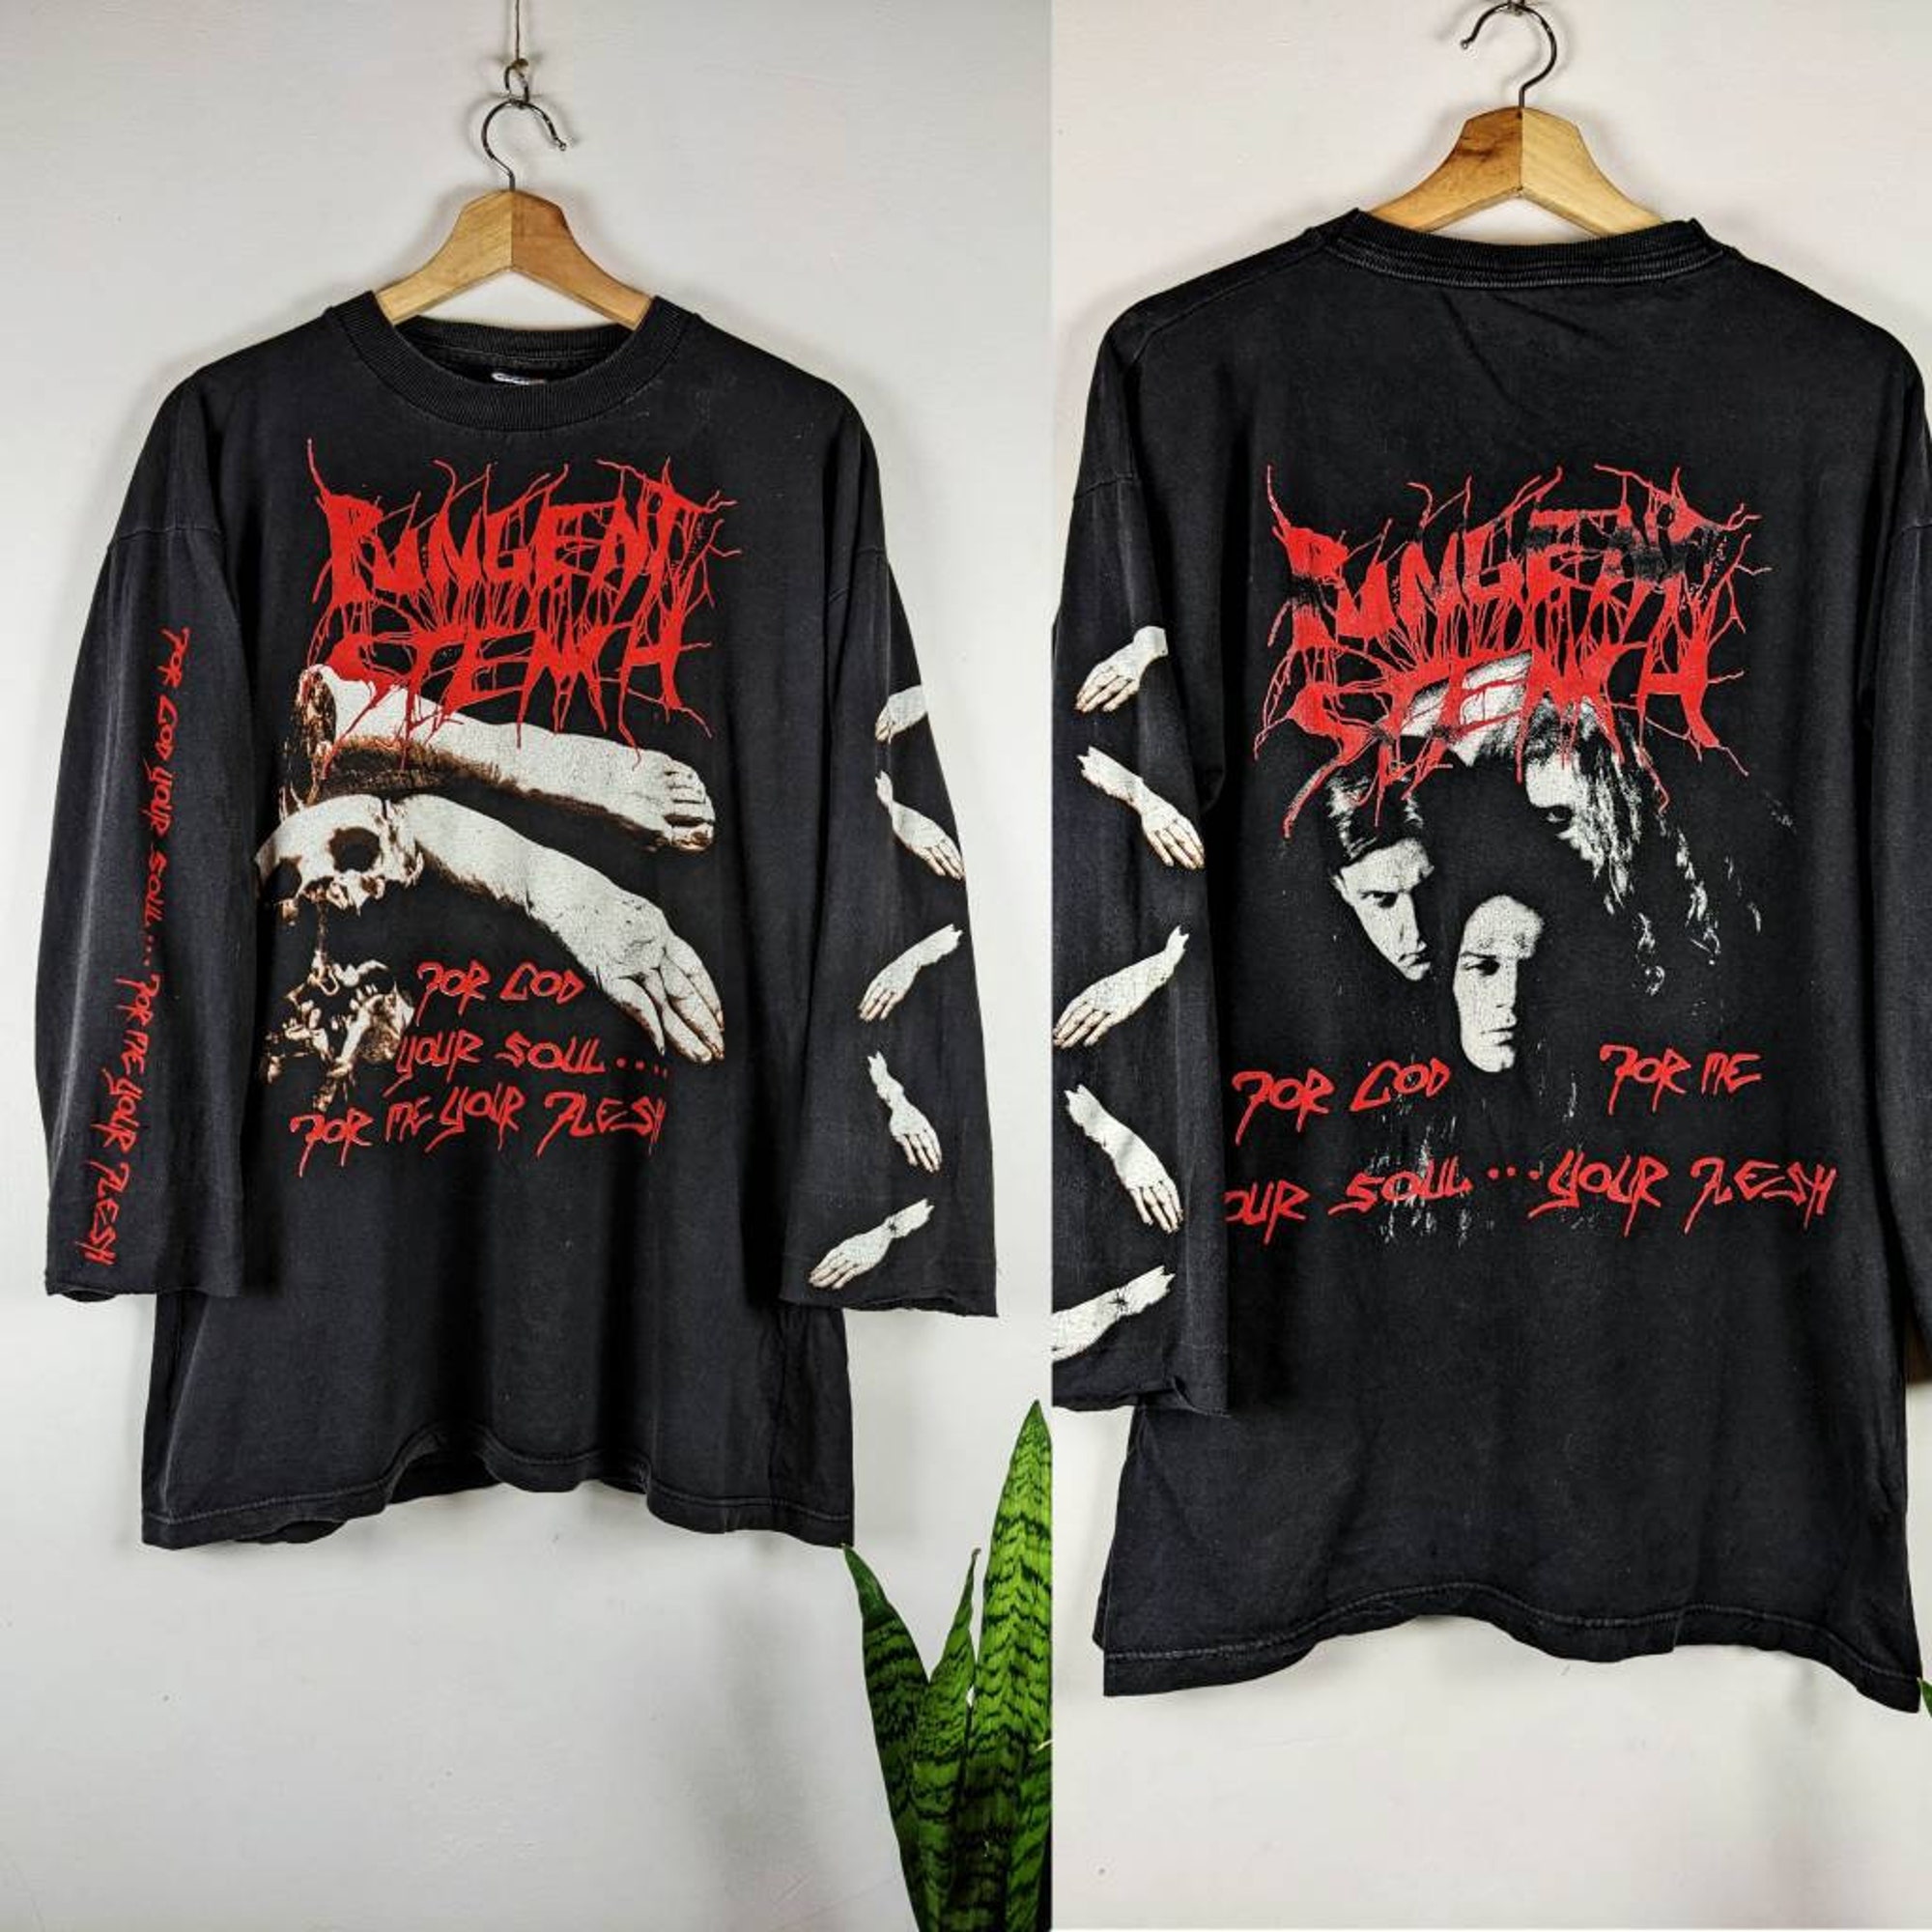 Vintage Pungent Stetch  Merch From God Your Soul For Me Your Flesh shirt